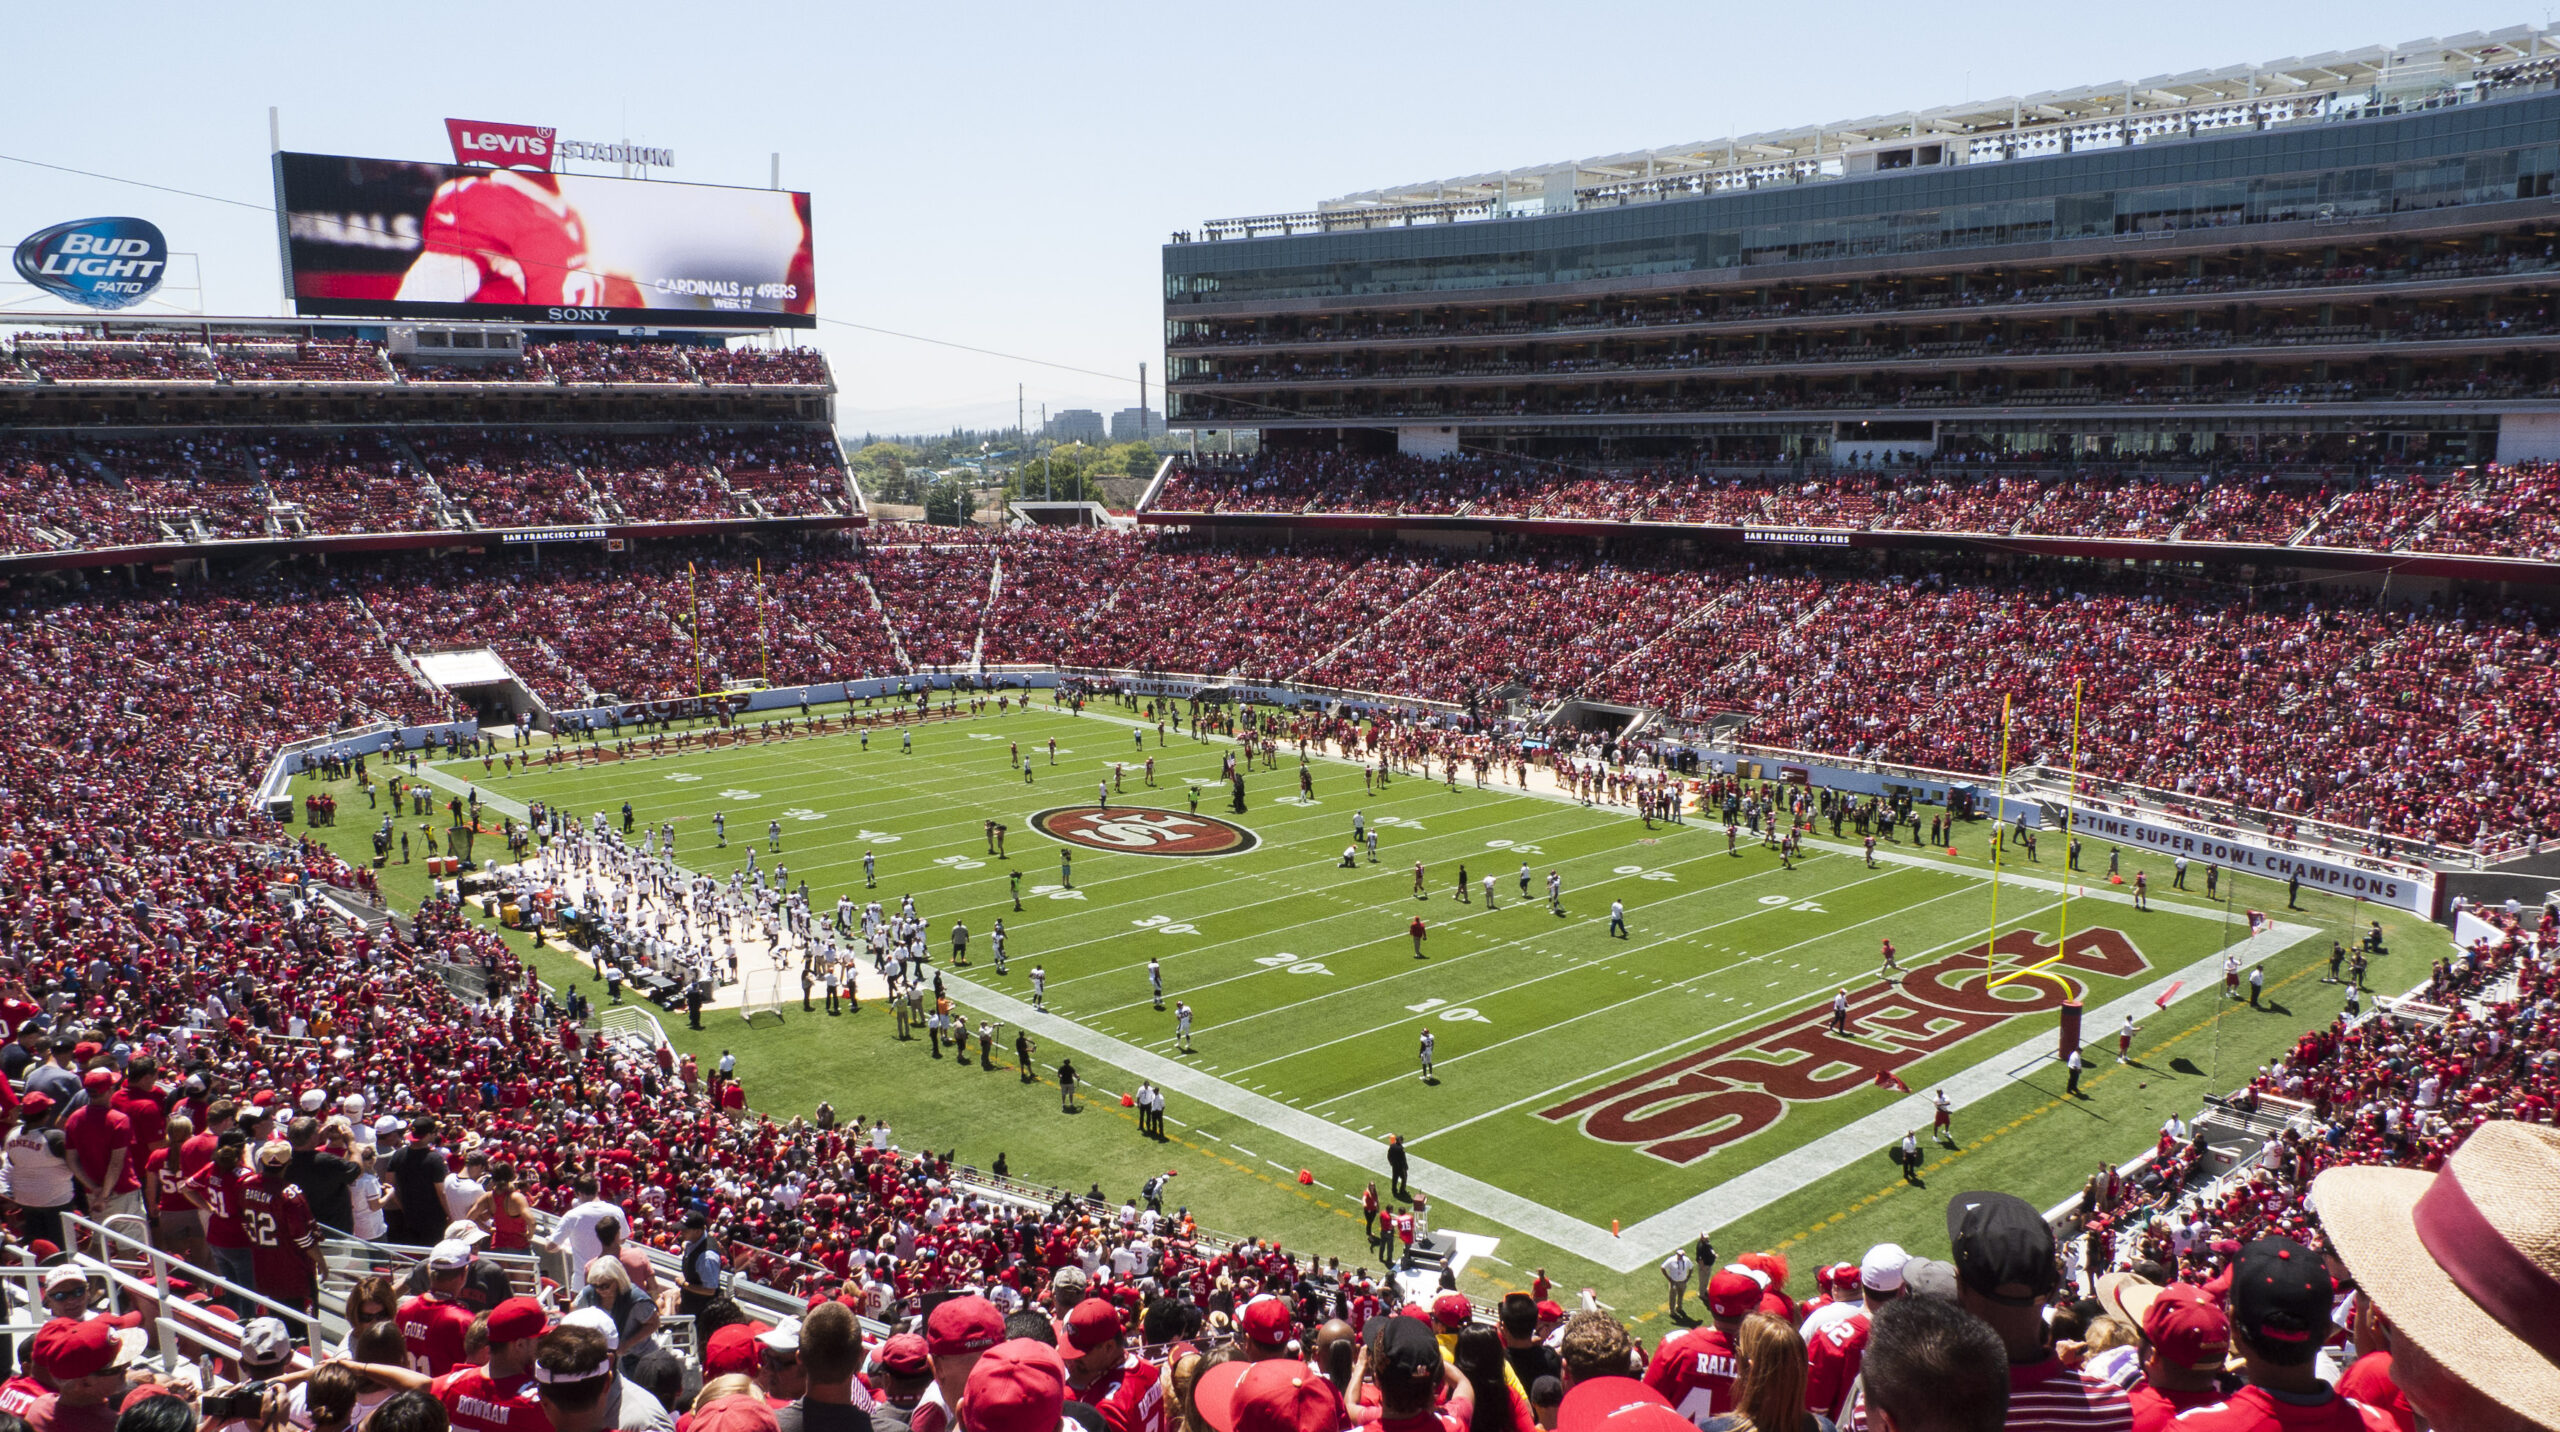 Levi’s Stadium could become mass COVID-19 vaccination center, officials say